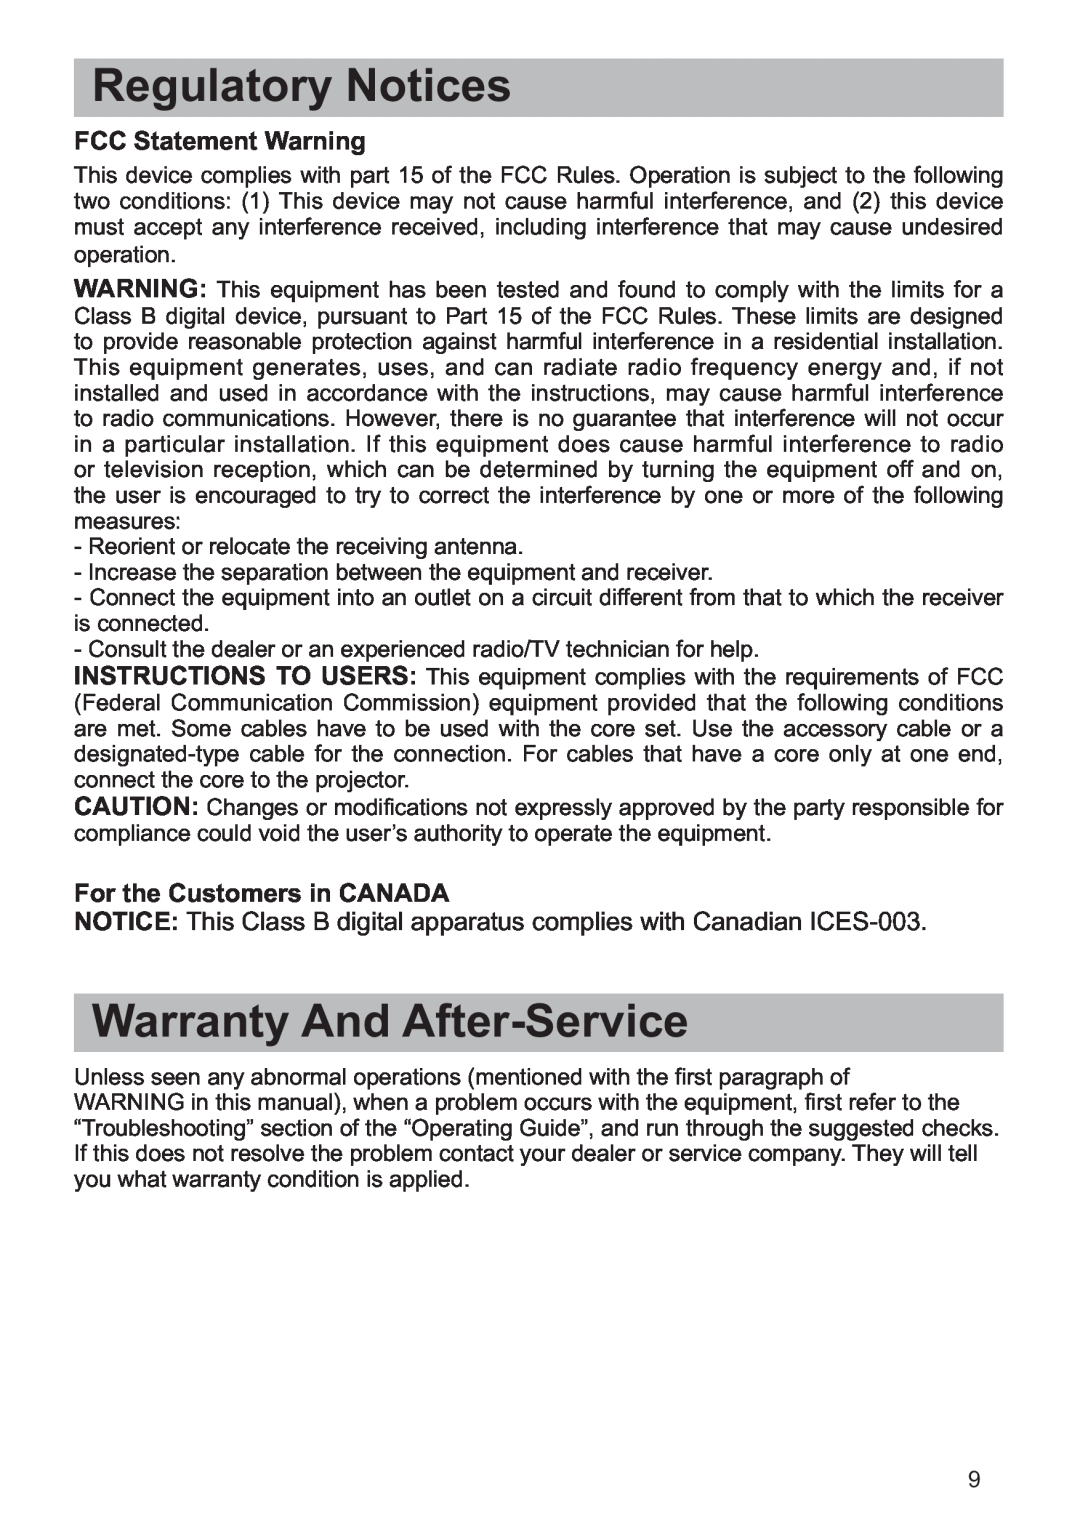 Hitachi CP-X3021WN Regulatory Notices, Warranty And After-Service, FCC Statement Warning, For the Customers in CANADA 